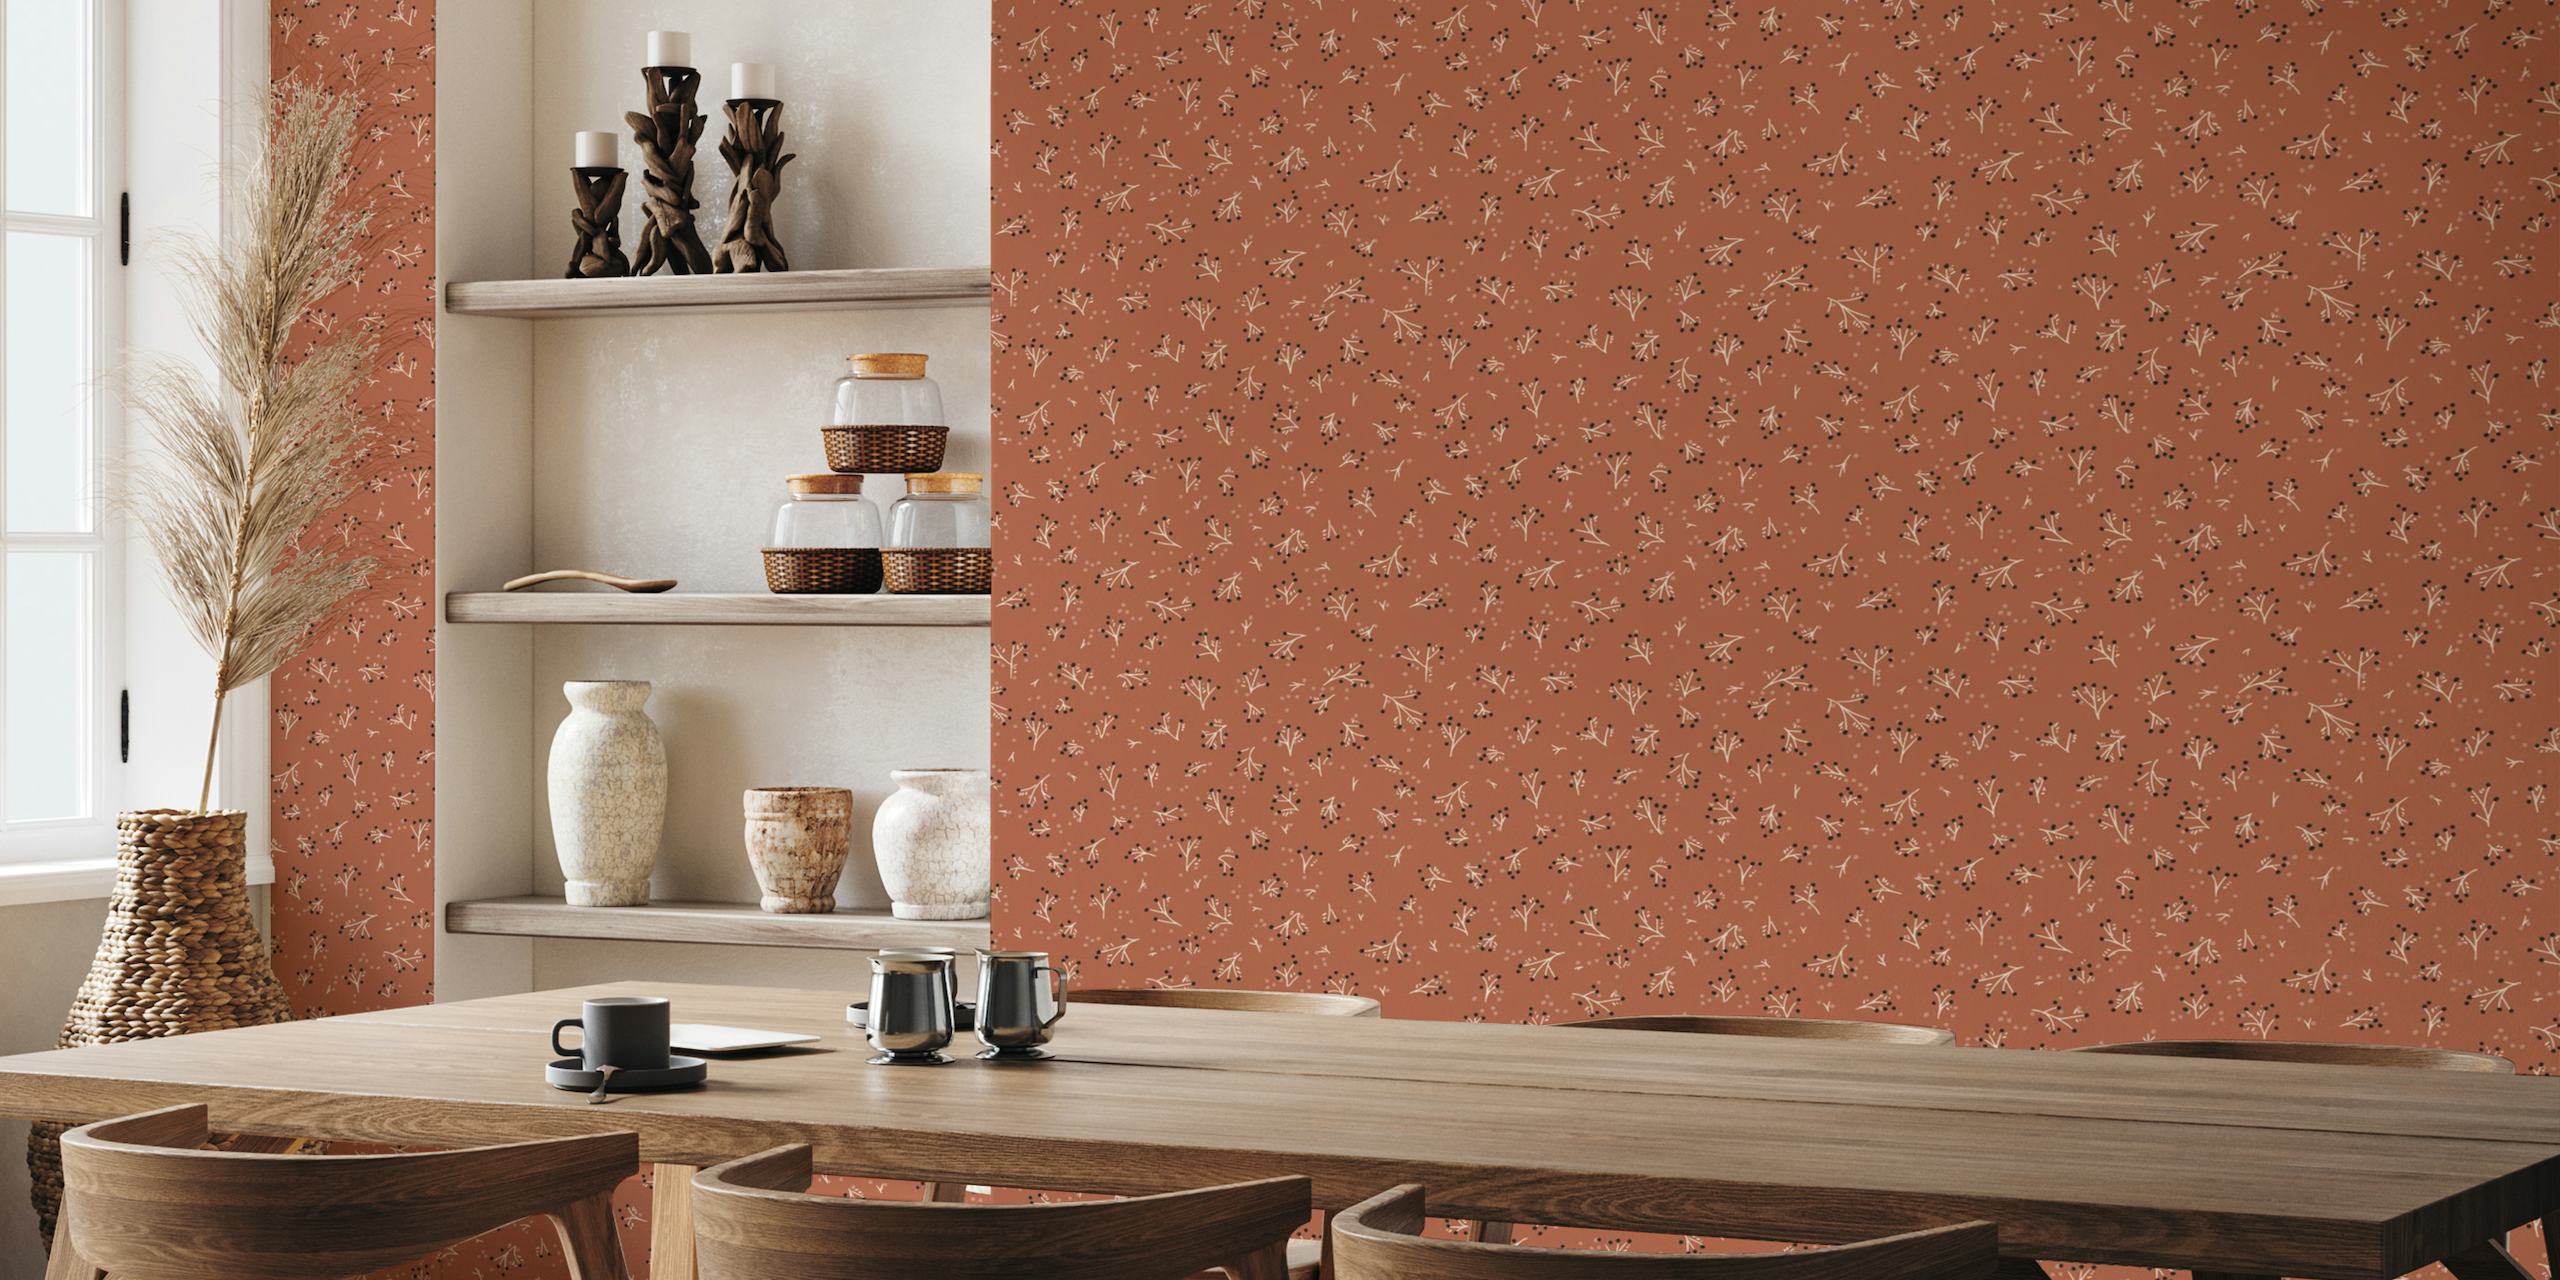 Indian Summer Ditsy Twigs Terracotta pattern wall mural